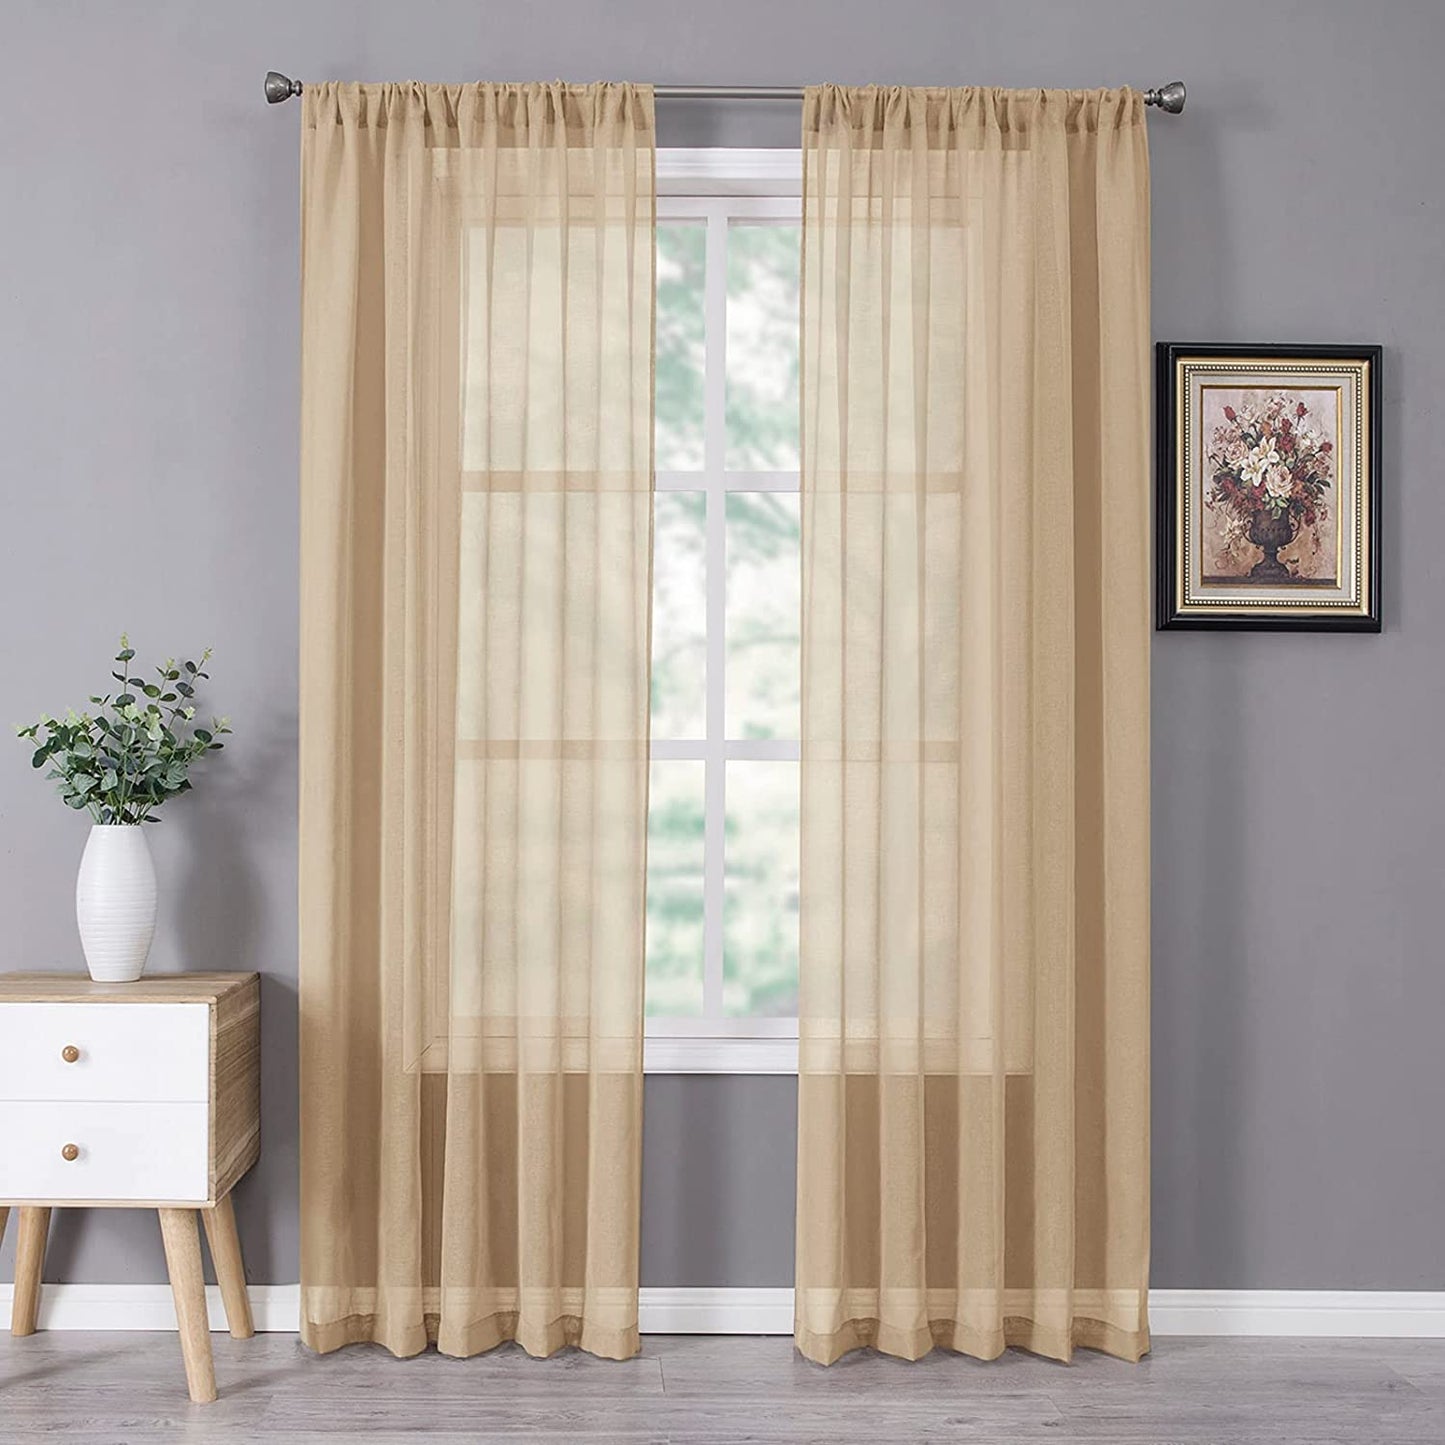 Tollpiz Short Sheer Curtains Linen Textured Bedroom Curtain Sheers Light Filtering Rod Pocket Voile Curtains for Living Room, 54 X 45 Inches Long, White, Set of 2 Panels  Tollpiz Tex Beige 54"W X 72"L 